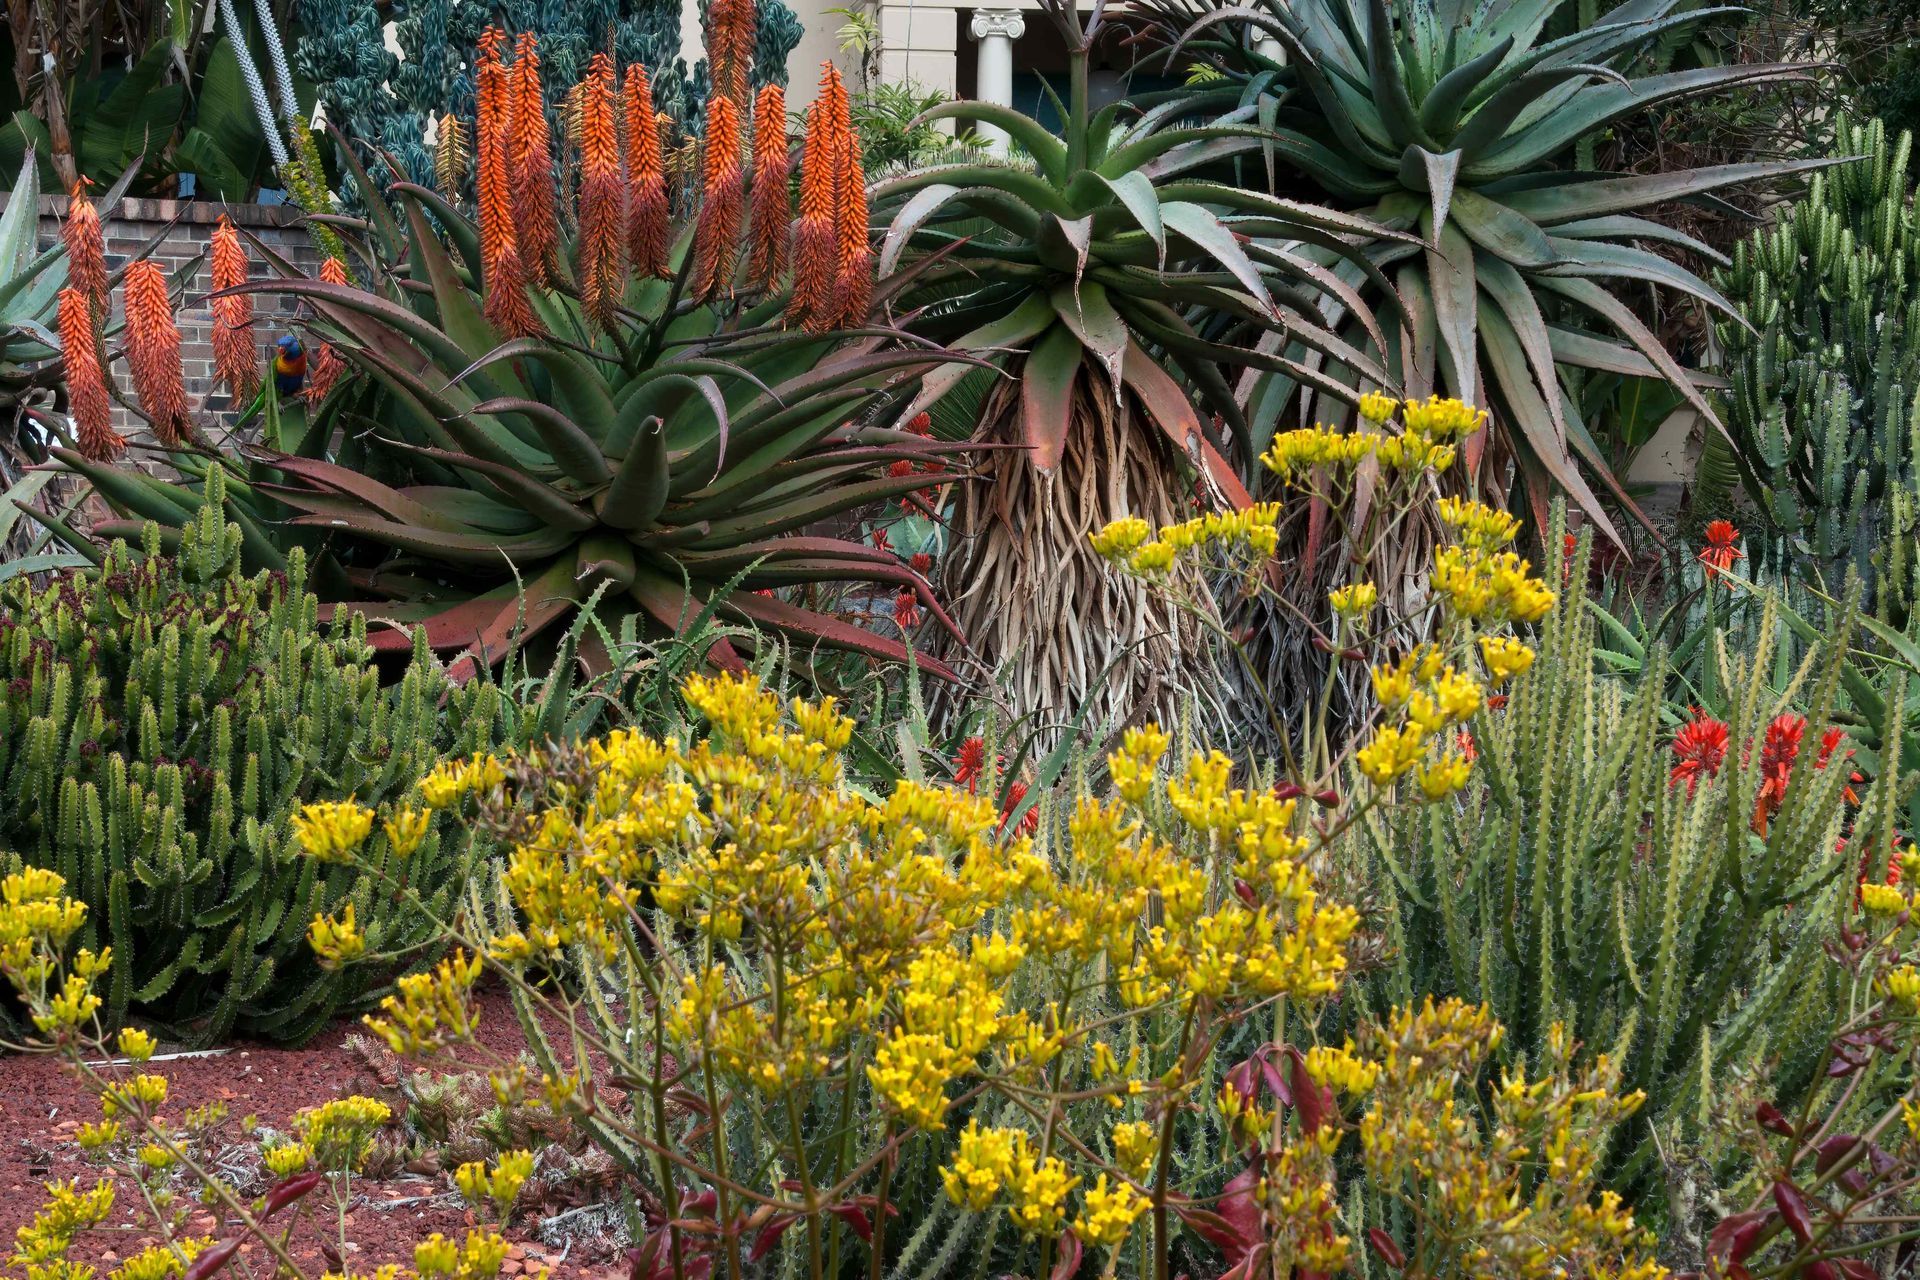 A Xeriscape containing native plants that are dought-resistant